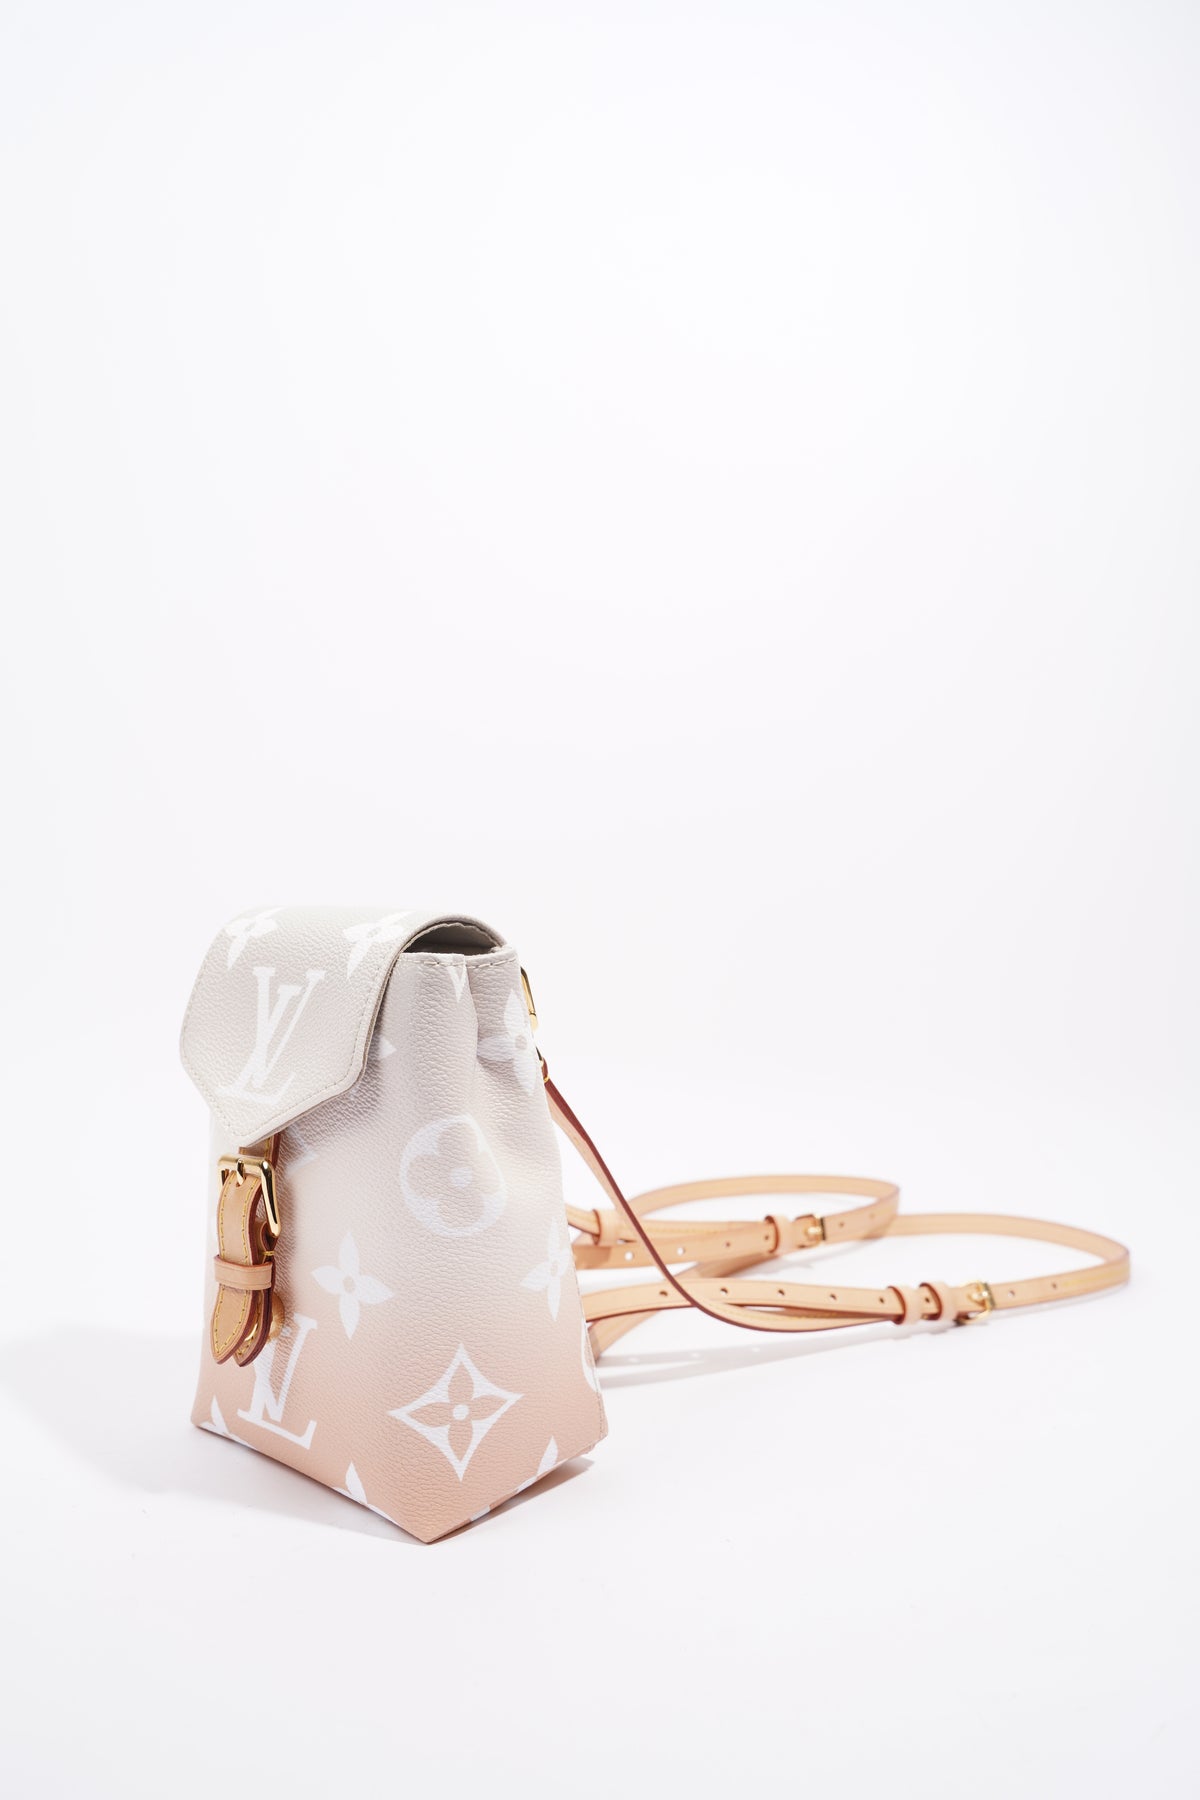 LOUIS VUITTON By the Pool Monogram Giant Tiny Backpack M45764 from